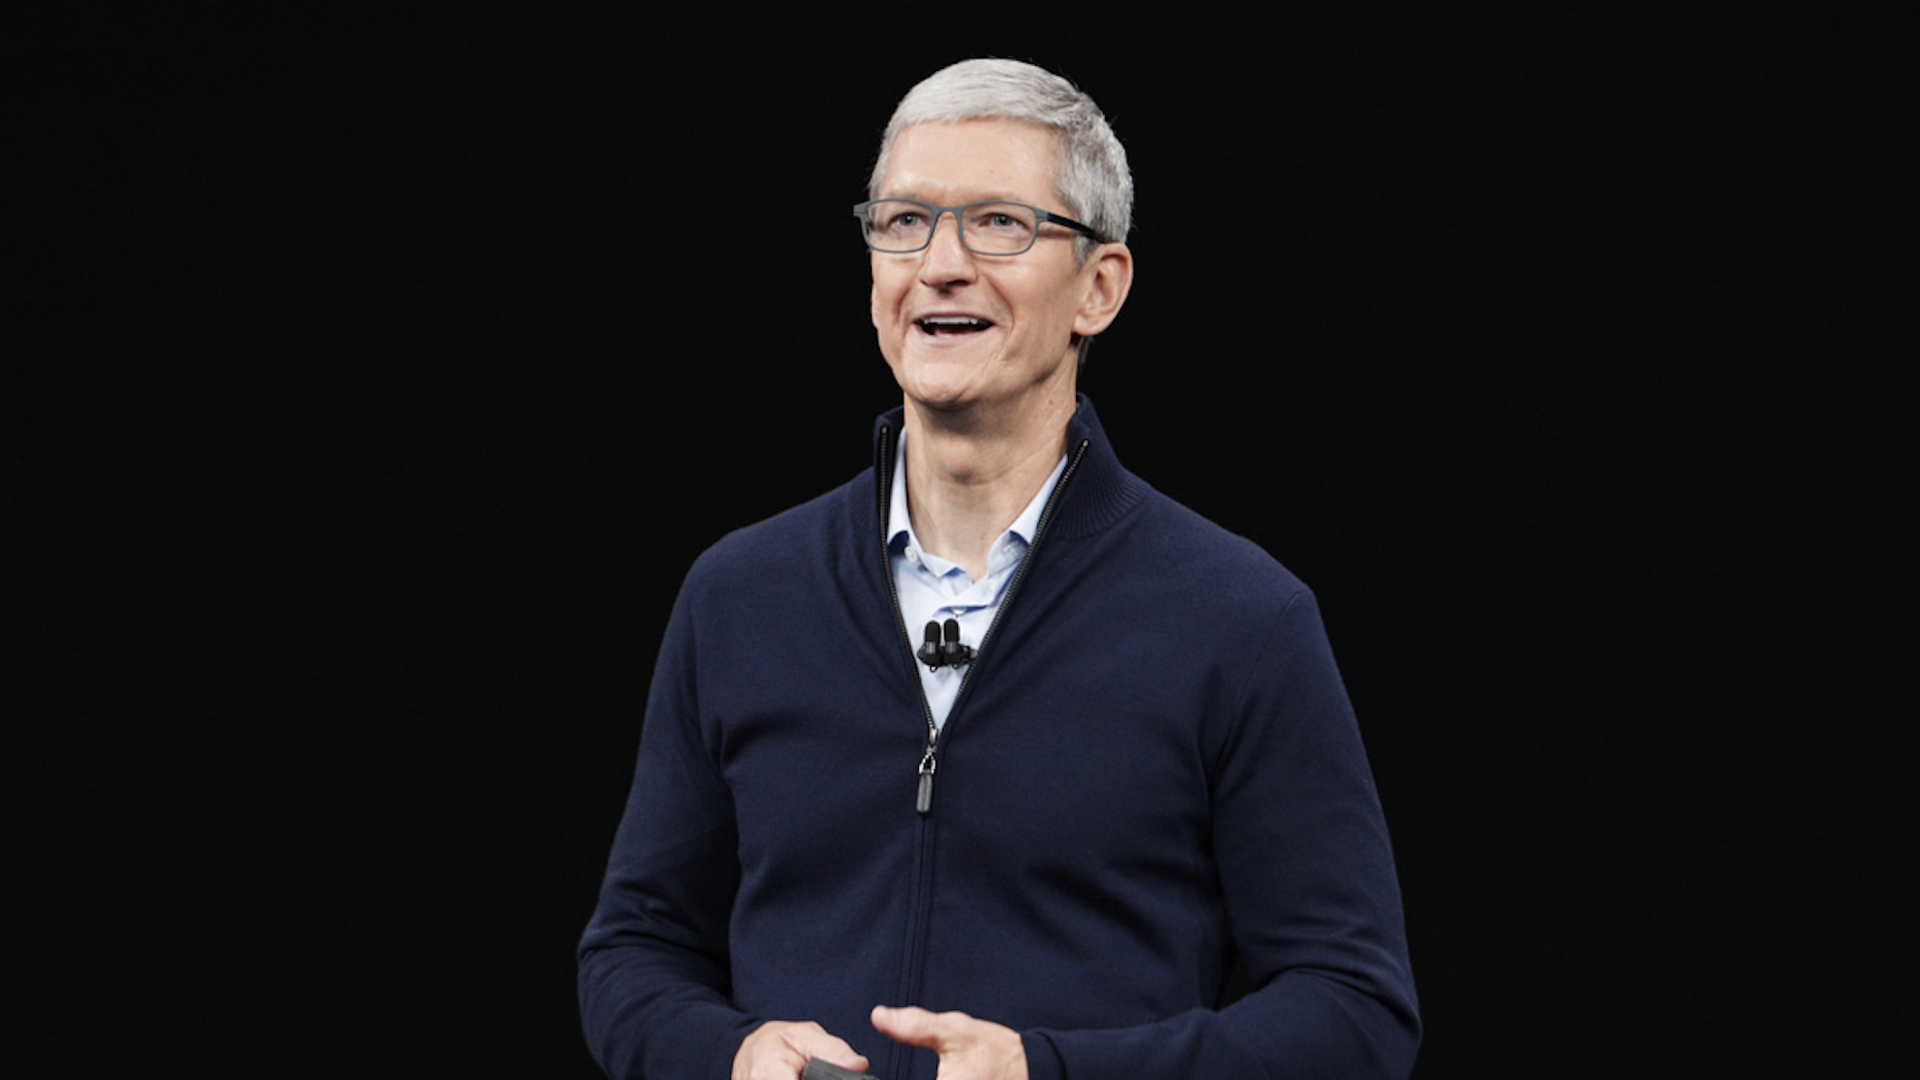 Tim Cook, speaking at a 2017 Apple event